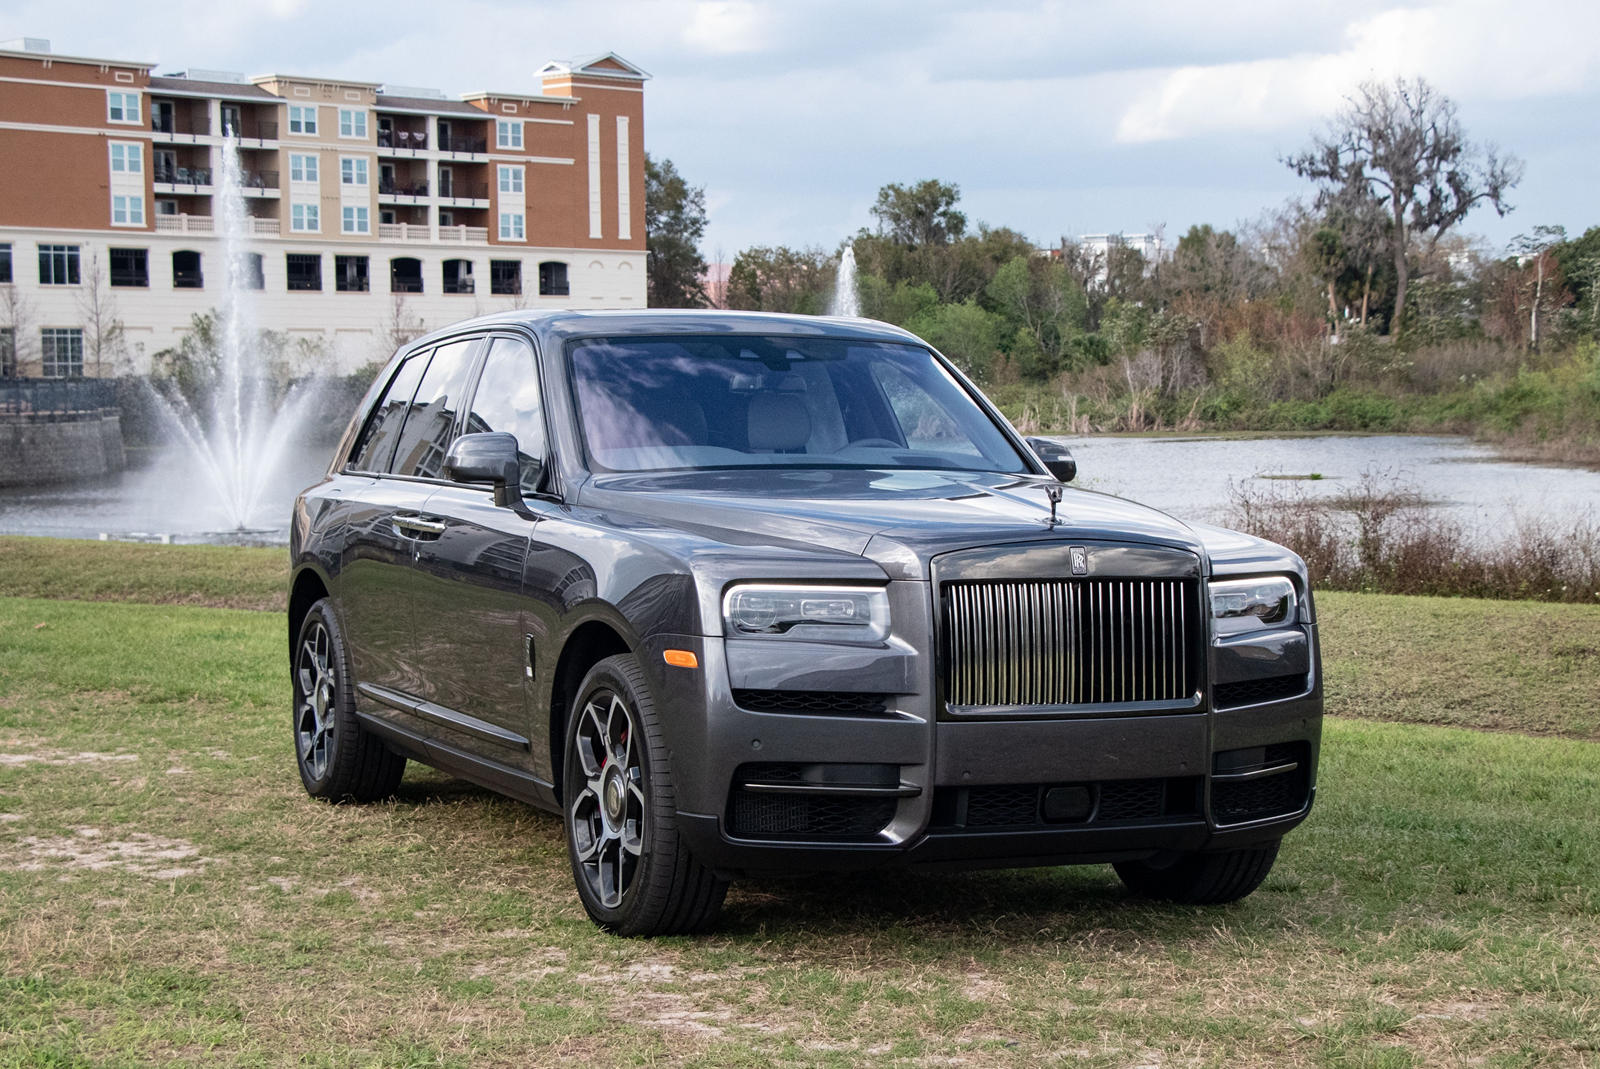 Used RollsRoyce Cullinan White For Sale Near Me Check Photos And